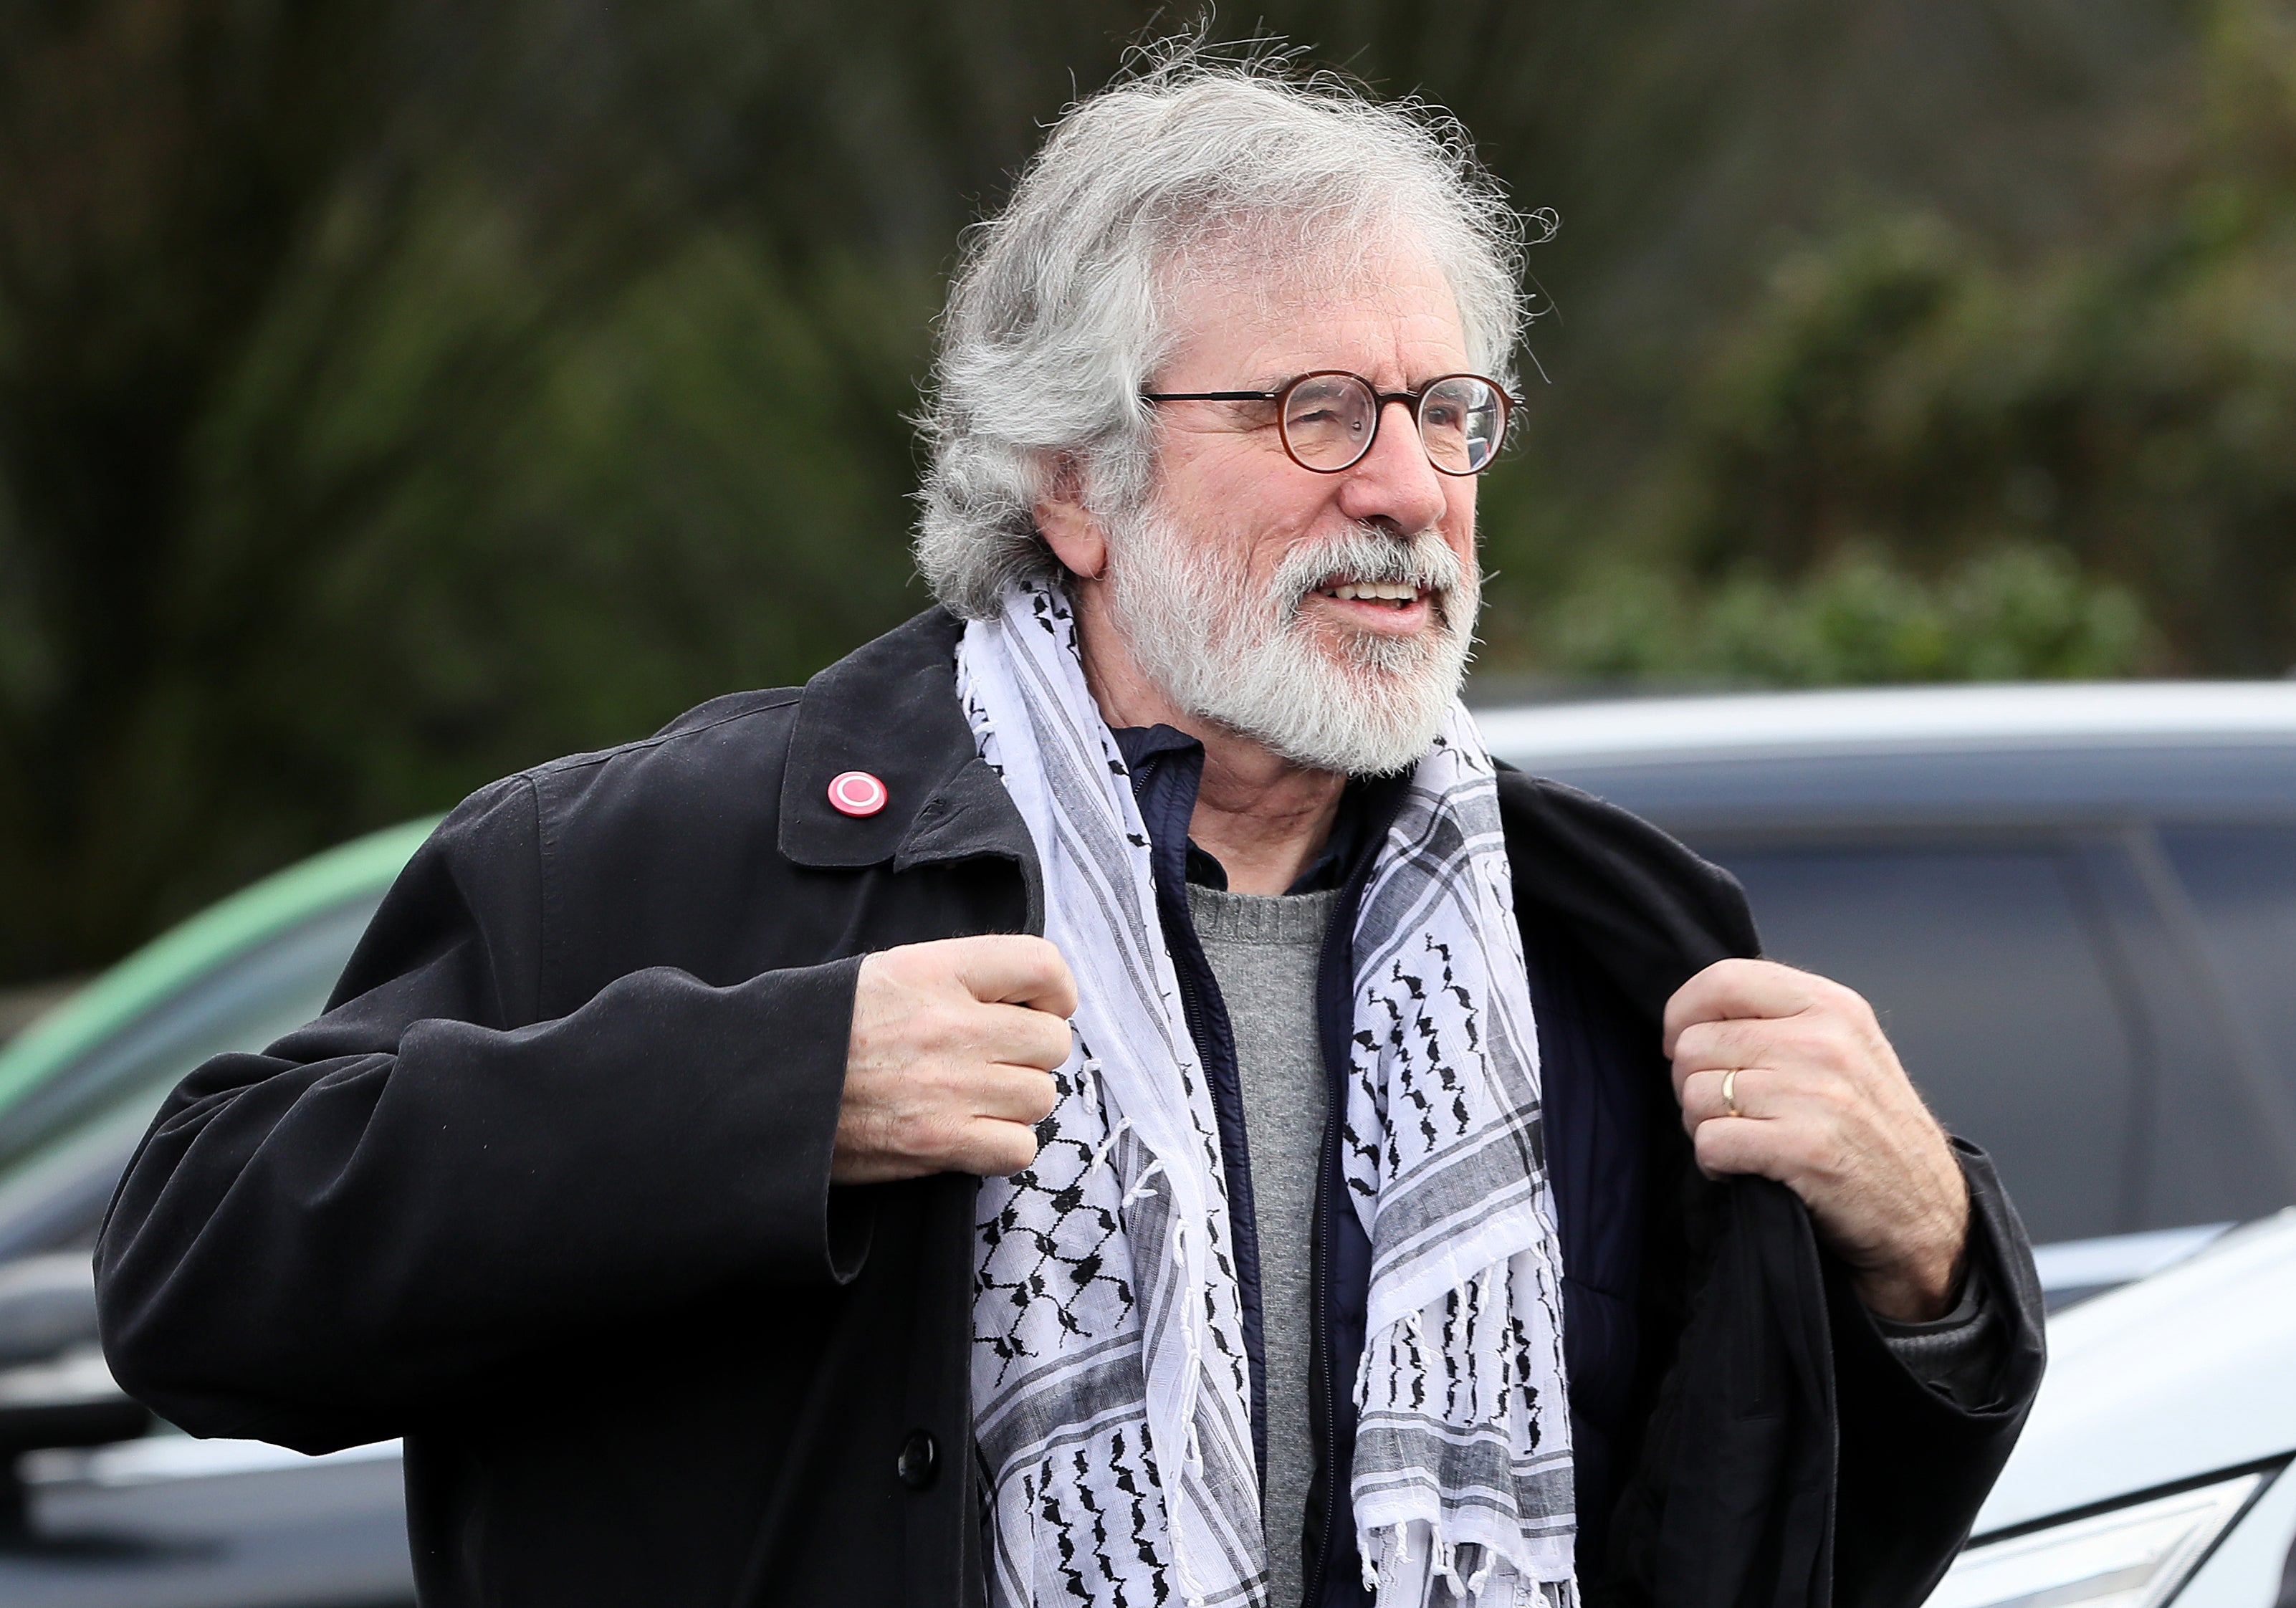 Former Sinn Fein president Gerry Adams is facing calls to apologise for the controversial comedy sketch (Brian Lawless/PA)